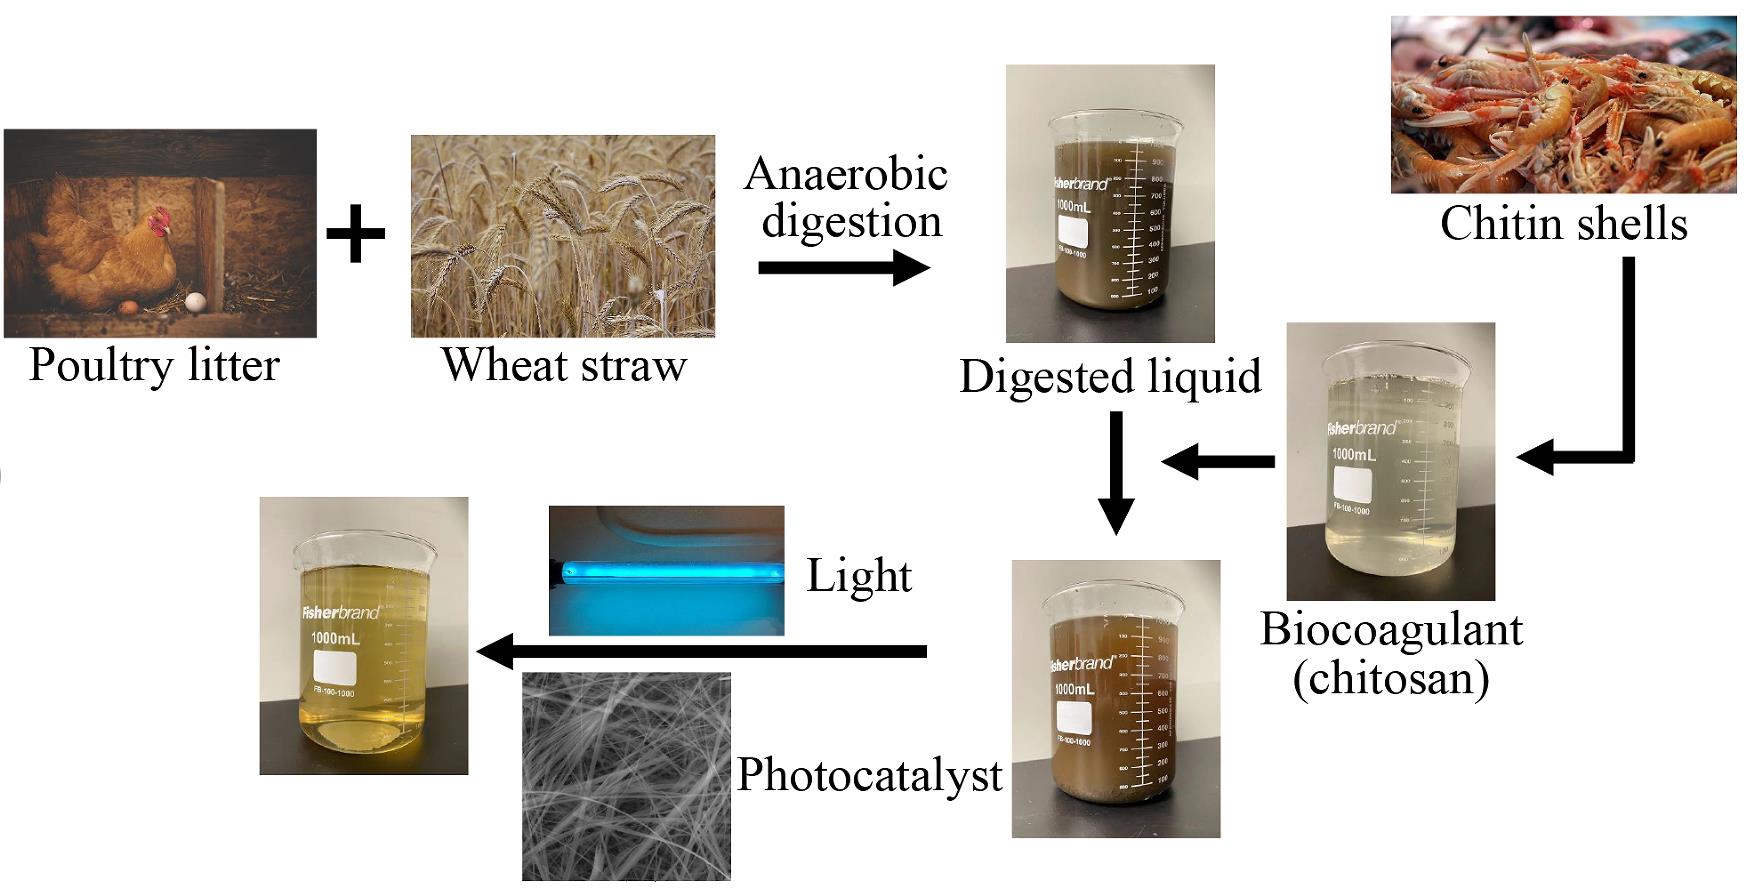 Innovative solution for poultry litter waste management using photocatalytic titanate nanofibers